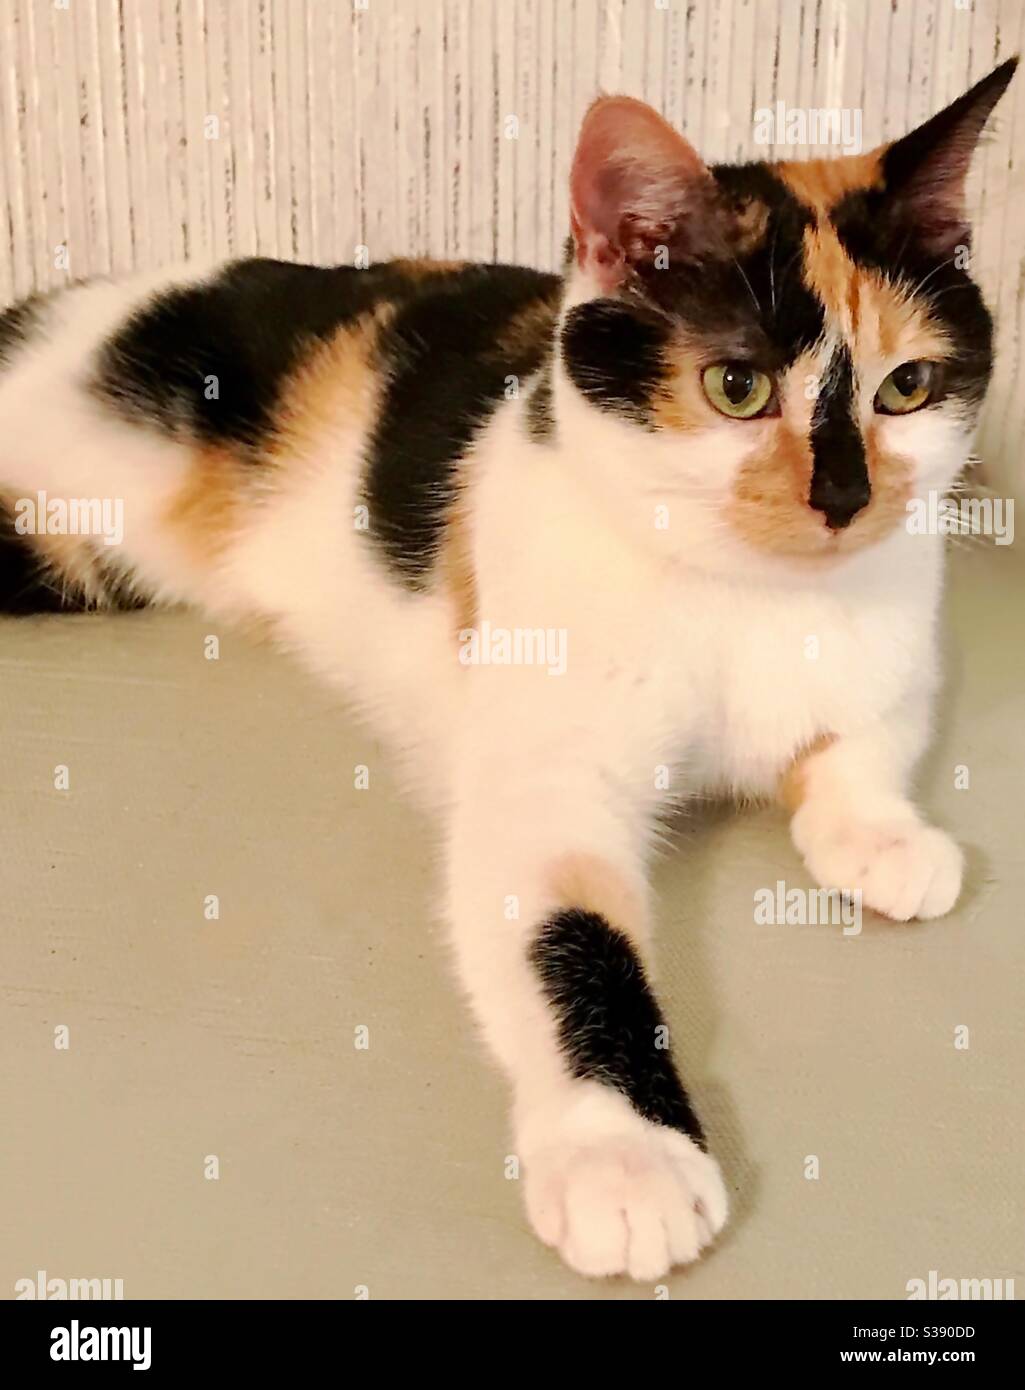 Portrait of beautiful calico cat with gorgeous green eyes but blind in her left eye, domestic or american shorthair, rescued tiny 4-week old kitten who was already blind, is now indoor companion pet Stock Photo